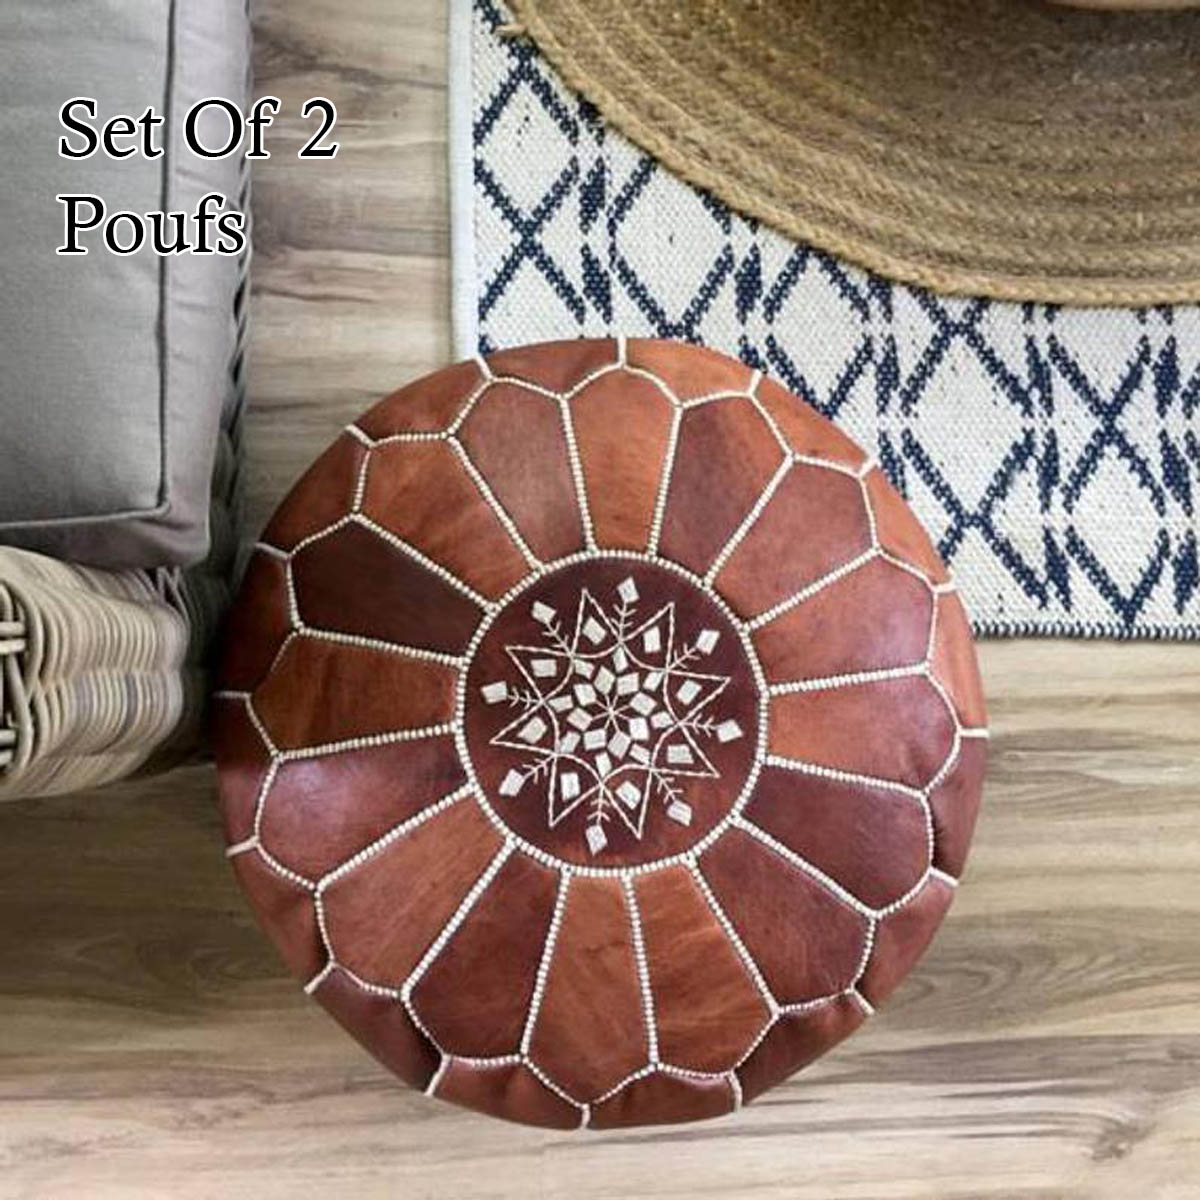 Leather Ottomans Moroccan Pouf, Moroccan Leather Poufs